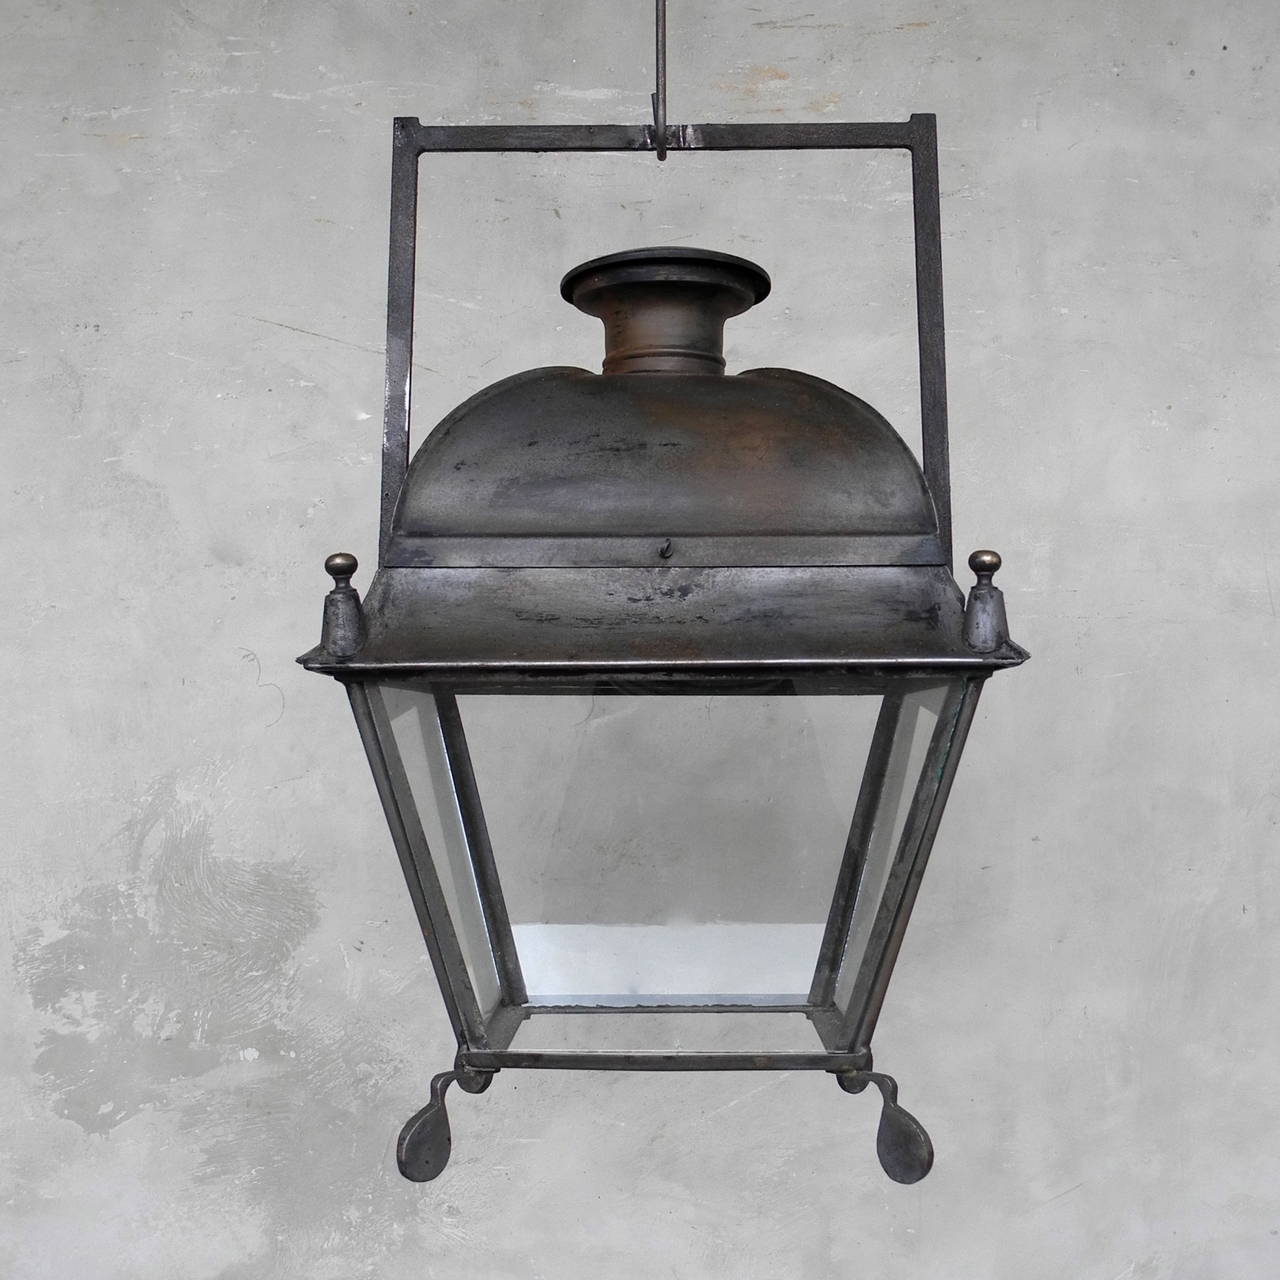 Antique 19th century French stable lantern.